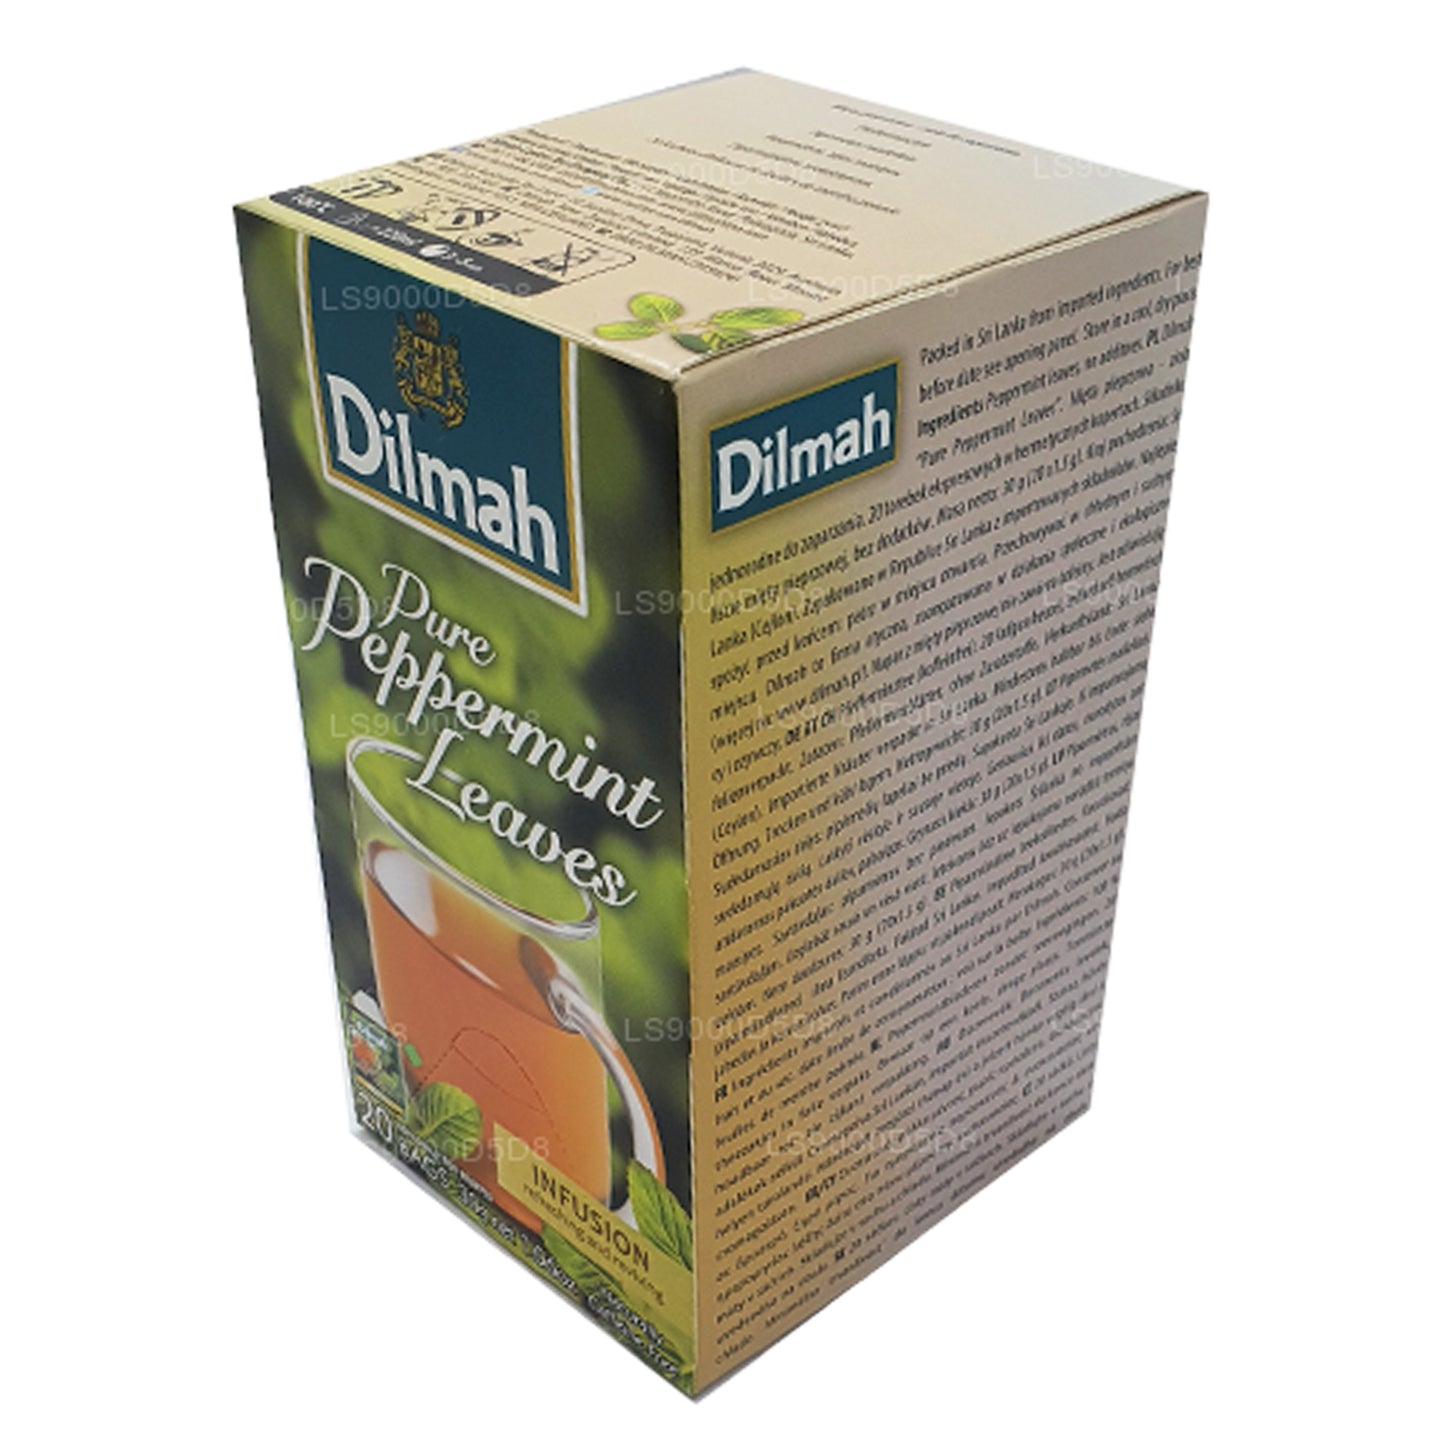 Dilmah Pure Peppermint Leaves (30g) 20 个茶包